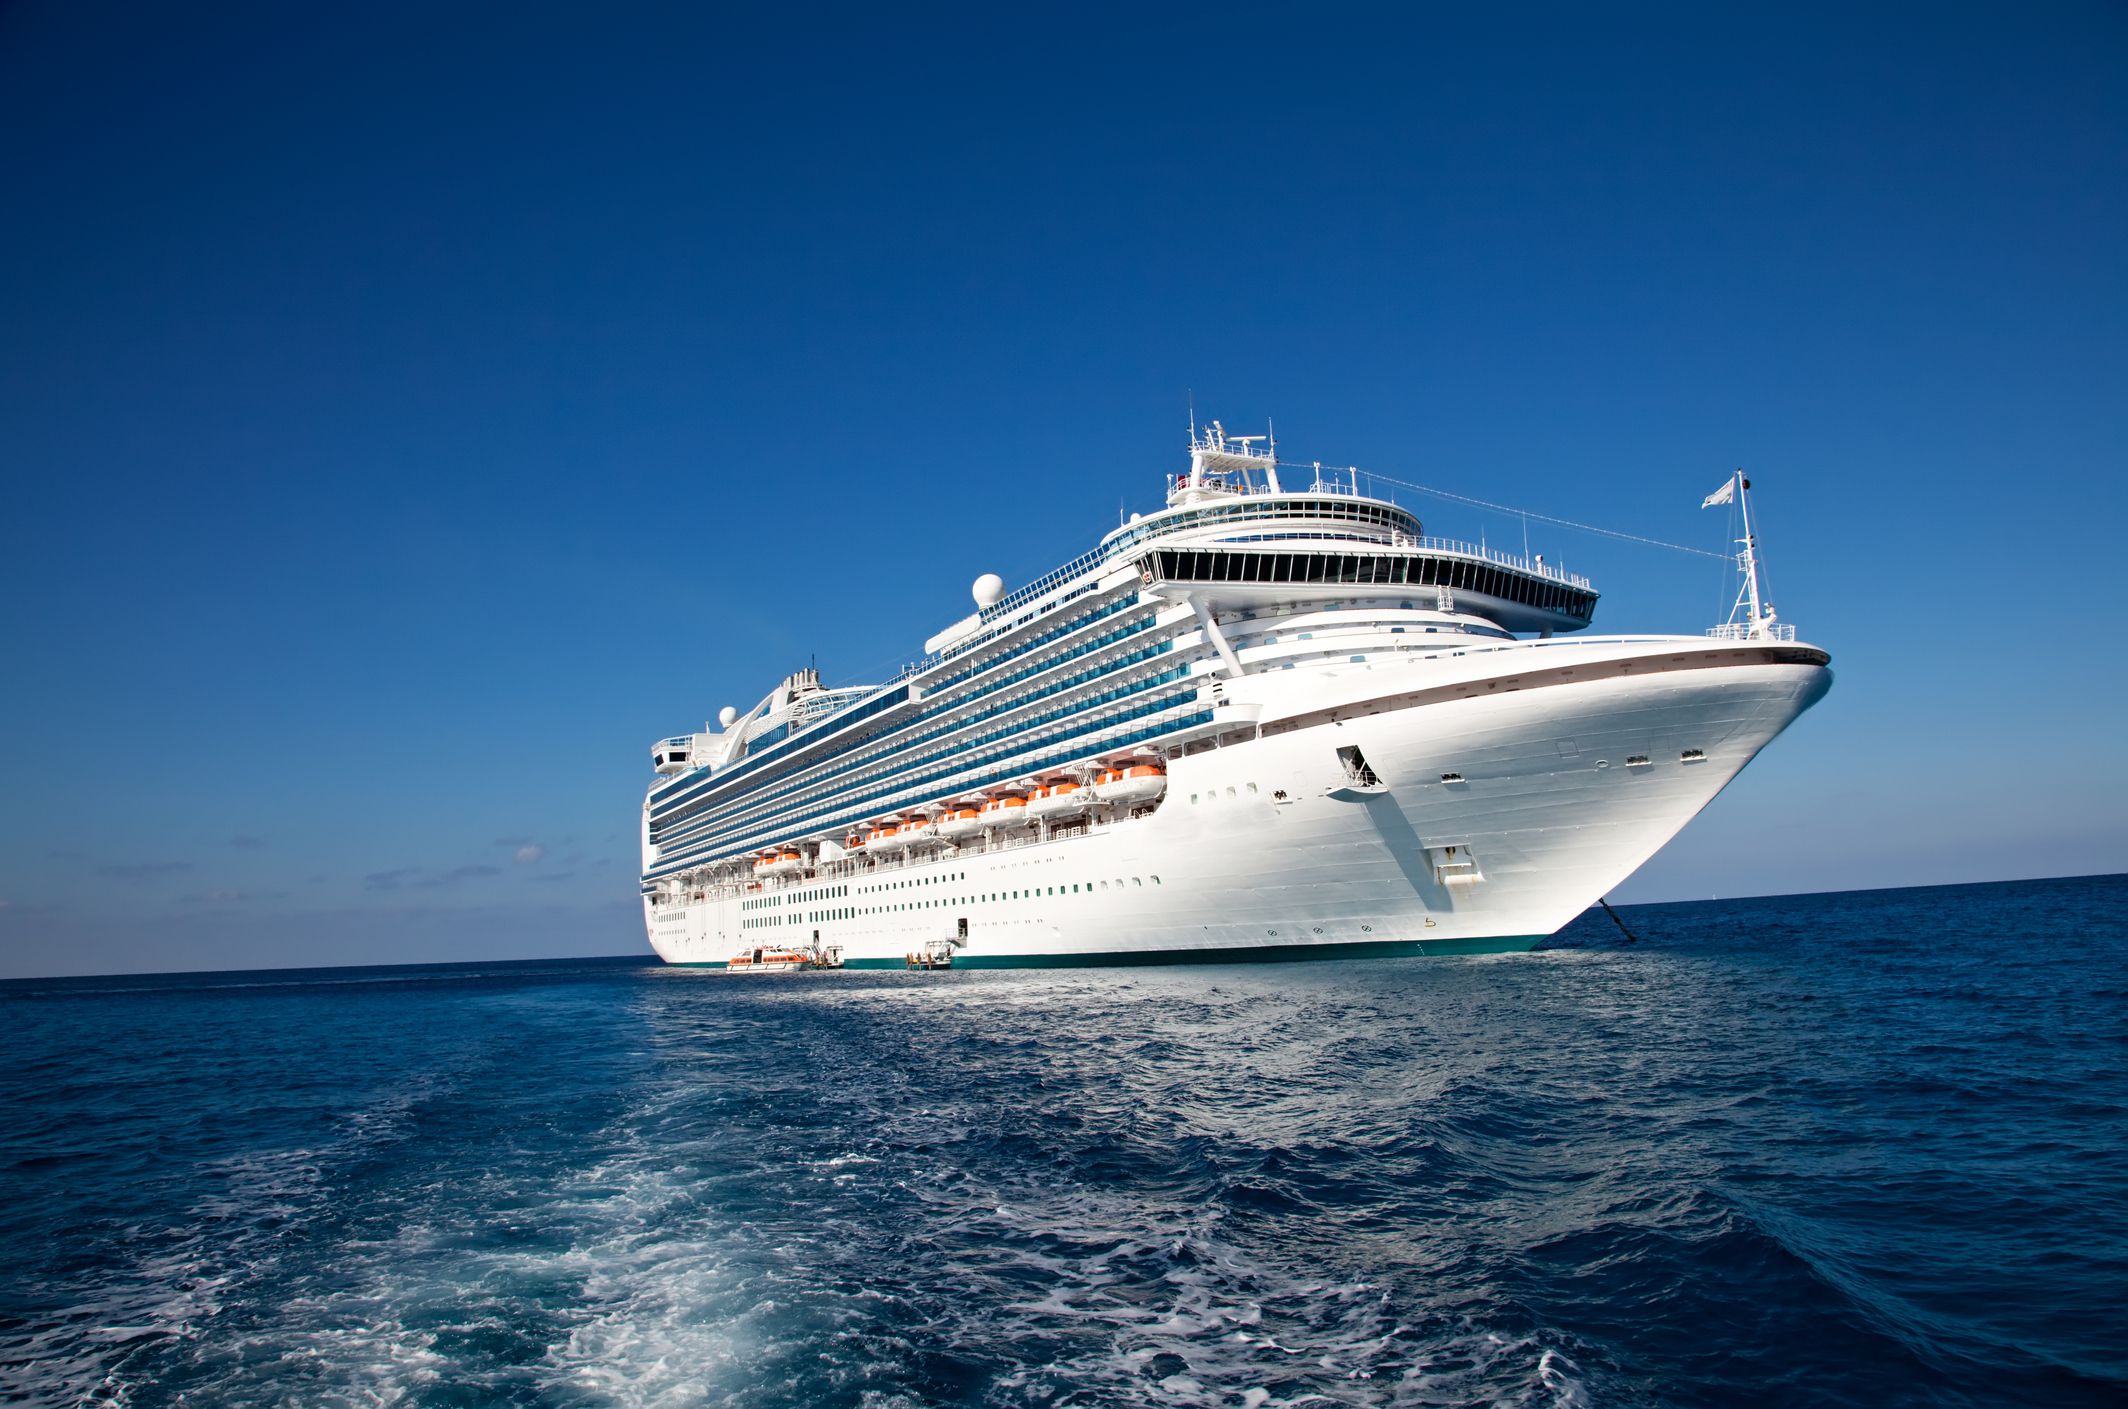 <p>Employees on cruise ships are <a href="https://www.cruisejobfinder.com/fm/cruises/foreign-flagged-cruise-ships.php">typically contracted</a> for several months at a time, meaning they spend extended periods away from family and friends. This separation can lead to feelings of isolation and homesickness — particularly during holidays or family milestones — which they have to miss. Cruise lines often also <a href="https://www.latimes.com/archives/la-xpm-2000-may-30-mn-35568-story.html">hire workers from other countries</a> to capitalize on currency conversion rates and pay lower wages.</p><p>"Cruise lines typically hire workers from Southeast Asia and Eastern Europe," <a href="https://www.reddit.com/r/Cruise/comments/14xvz3u/comment/jrp81u5/?utm_source=share&utm_medium=web3x&utm_name=web3xcss&utm_term=1&utm_content=share_button">writes one user.</a> "That is because they can pay them a little as possible, the money does translate for them to be fairly good, and they aren't going to quit because they are far away from home." Well, damn. </p><p><b>Related:</b> <a href="https://blog.cheapism.com/cruise-ship-nightmares/">The Worst Cruise Ship Horror Stories</a></p>